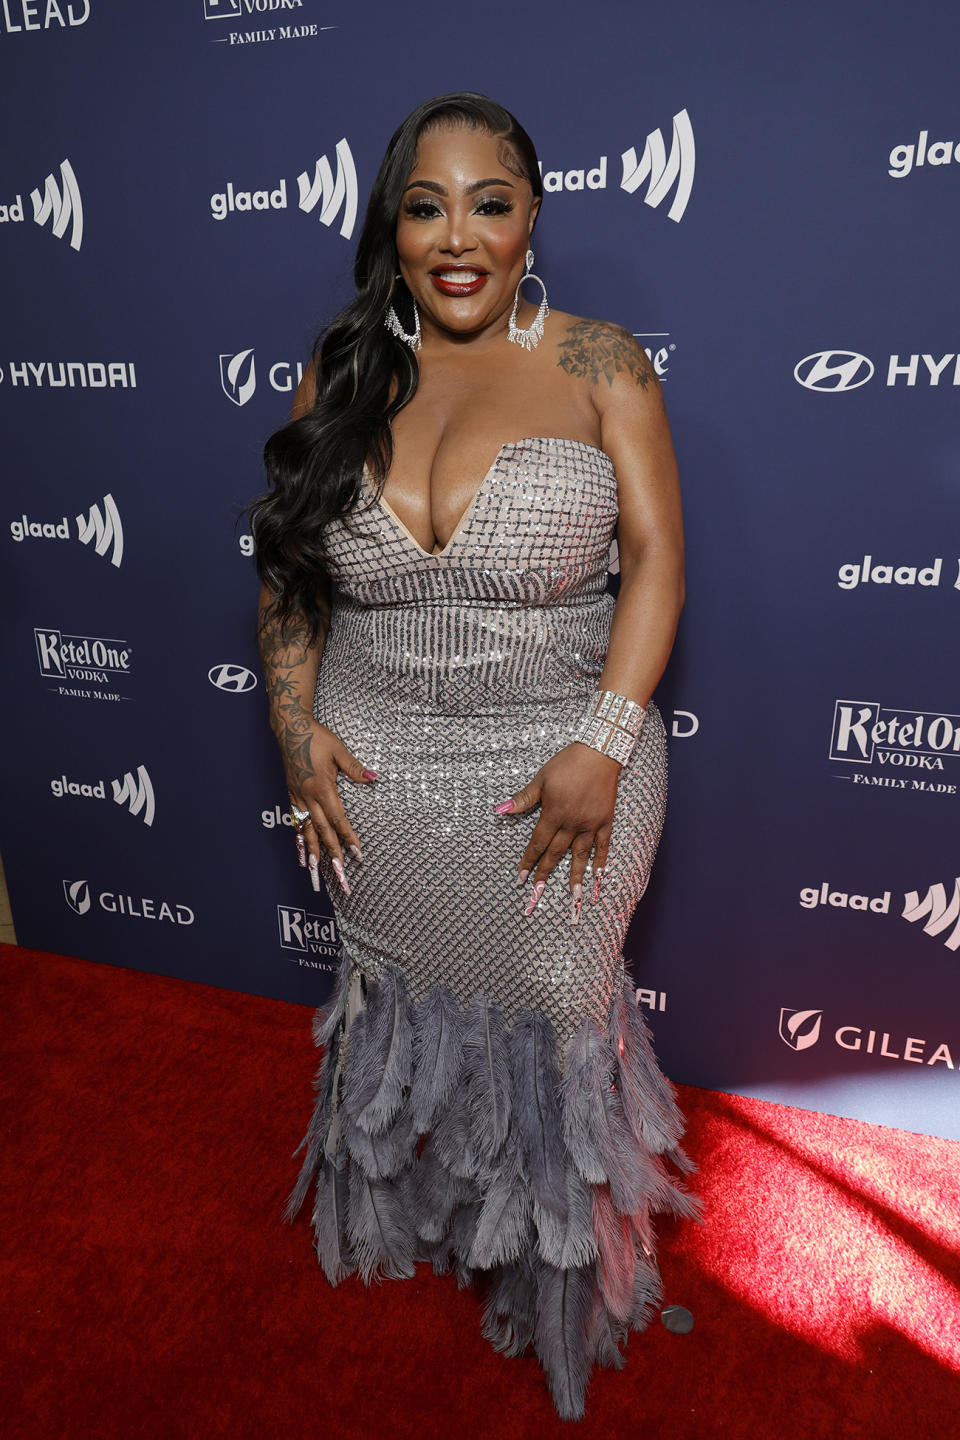 <p>BEVERLY HILLS, CALIFORNIA – MARCH 30: Ts Madison attends the GLAAD Media Awards at The Beverly Hilton on March 30, 2023 in Beverly Hills, California. (Photo by Frazer Harrison/Getty Images for GLAAD)</p>